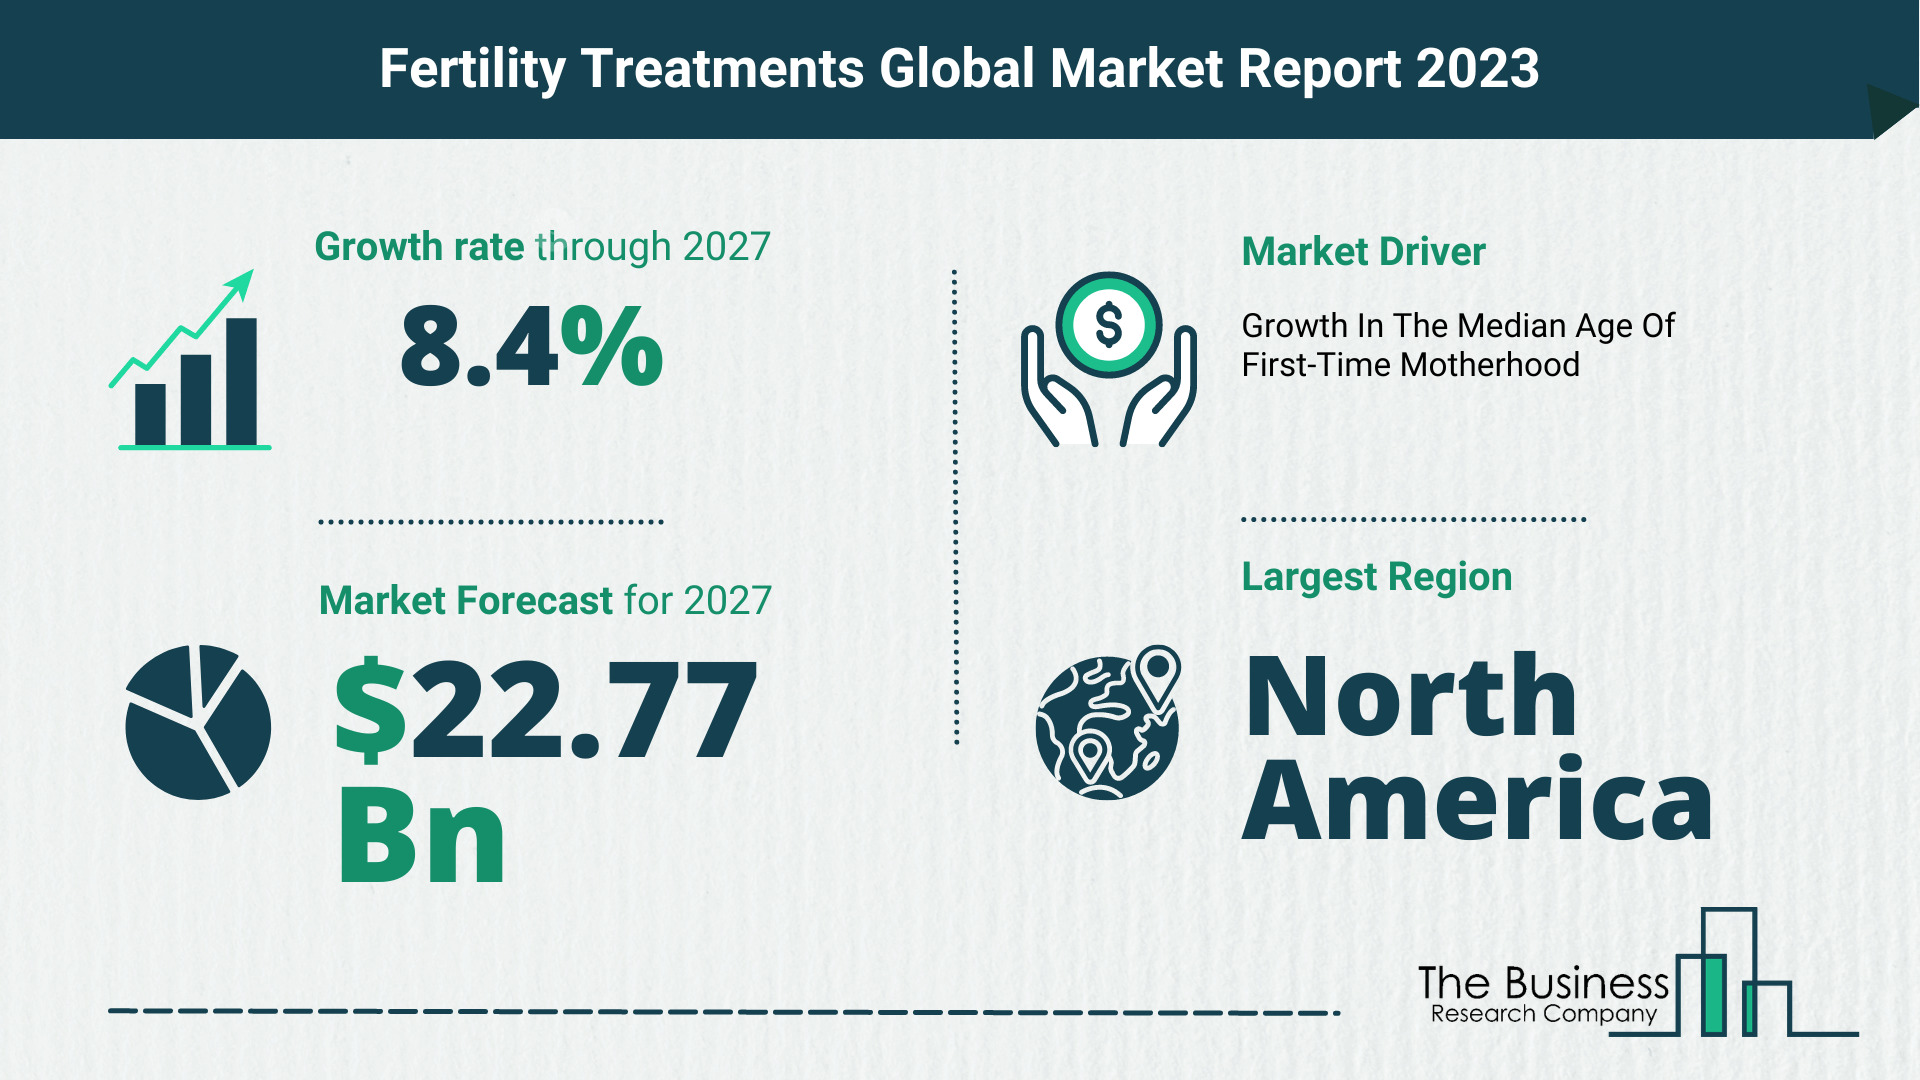 How Will The Fertility Treatments Market Globally Expand In 2023?